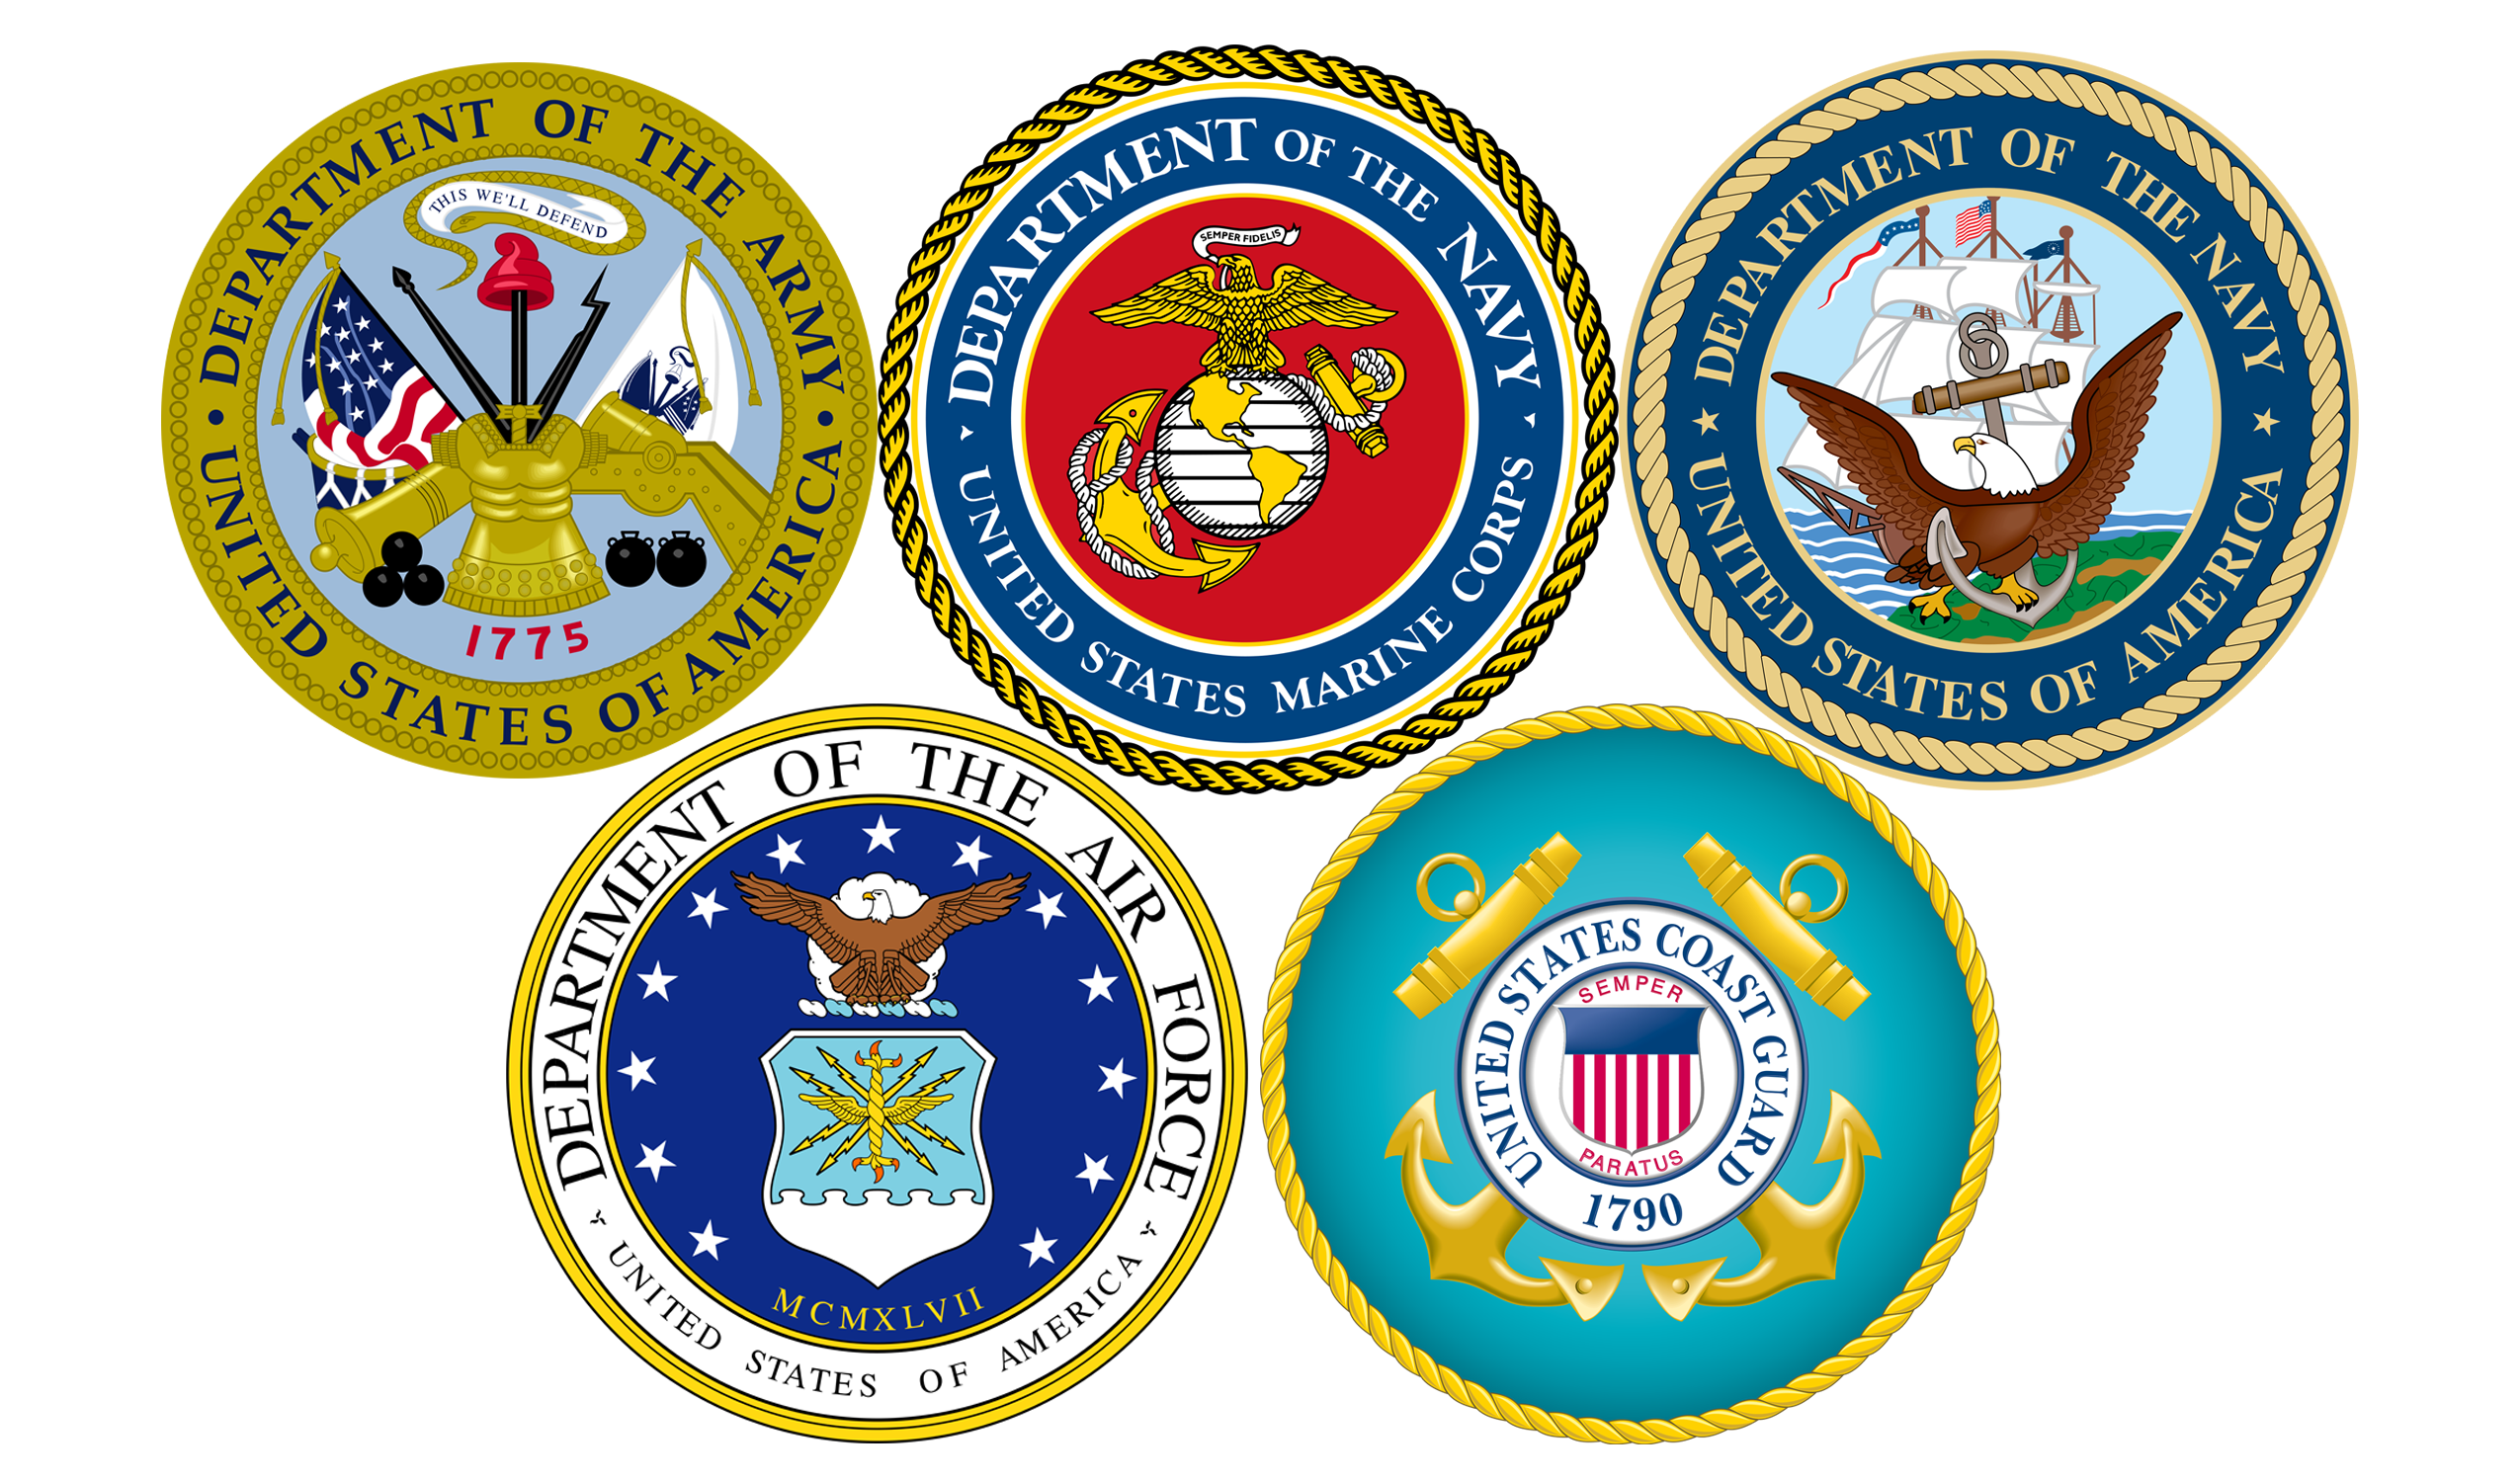 Military Branch Wallpaper. Awesome Military Wallpaper, Incredible HD Military Wallpaper and Sad Military Wallpaper